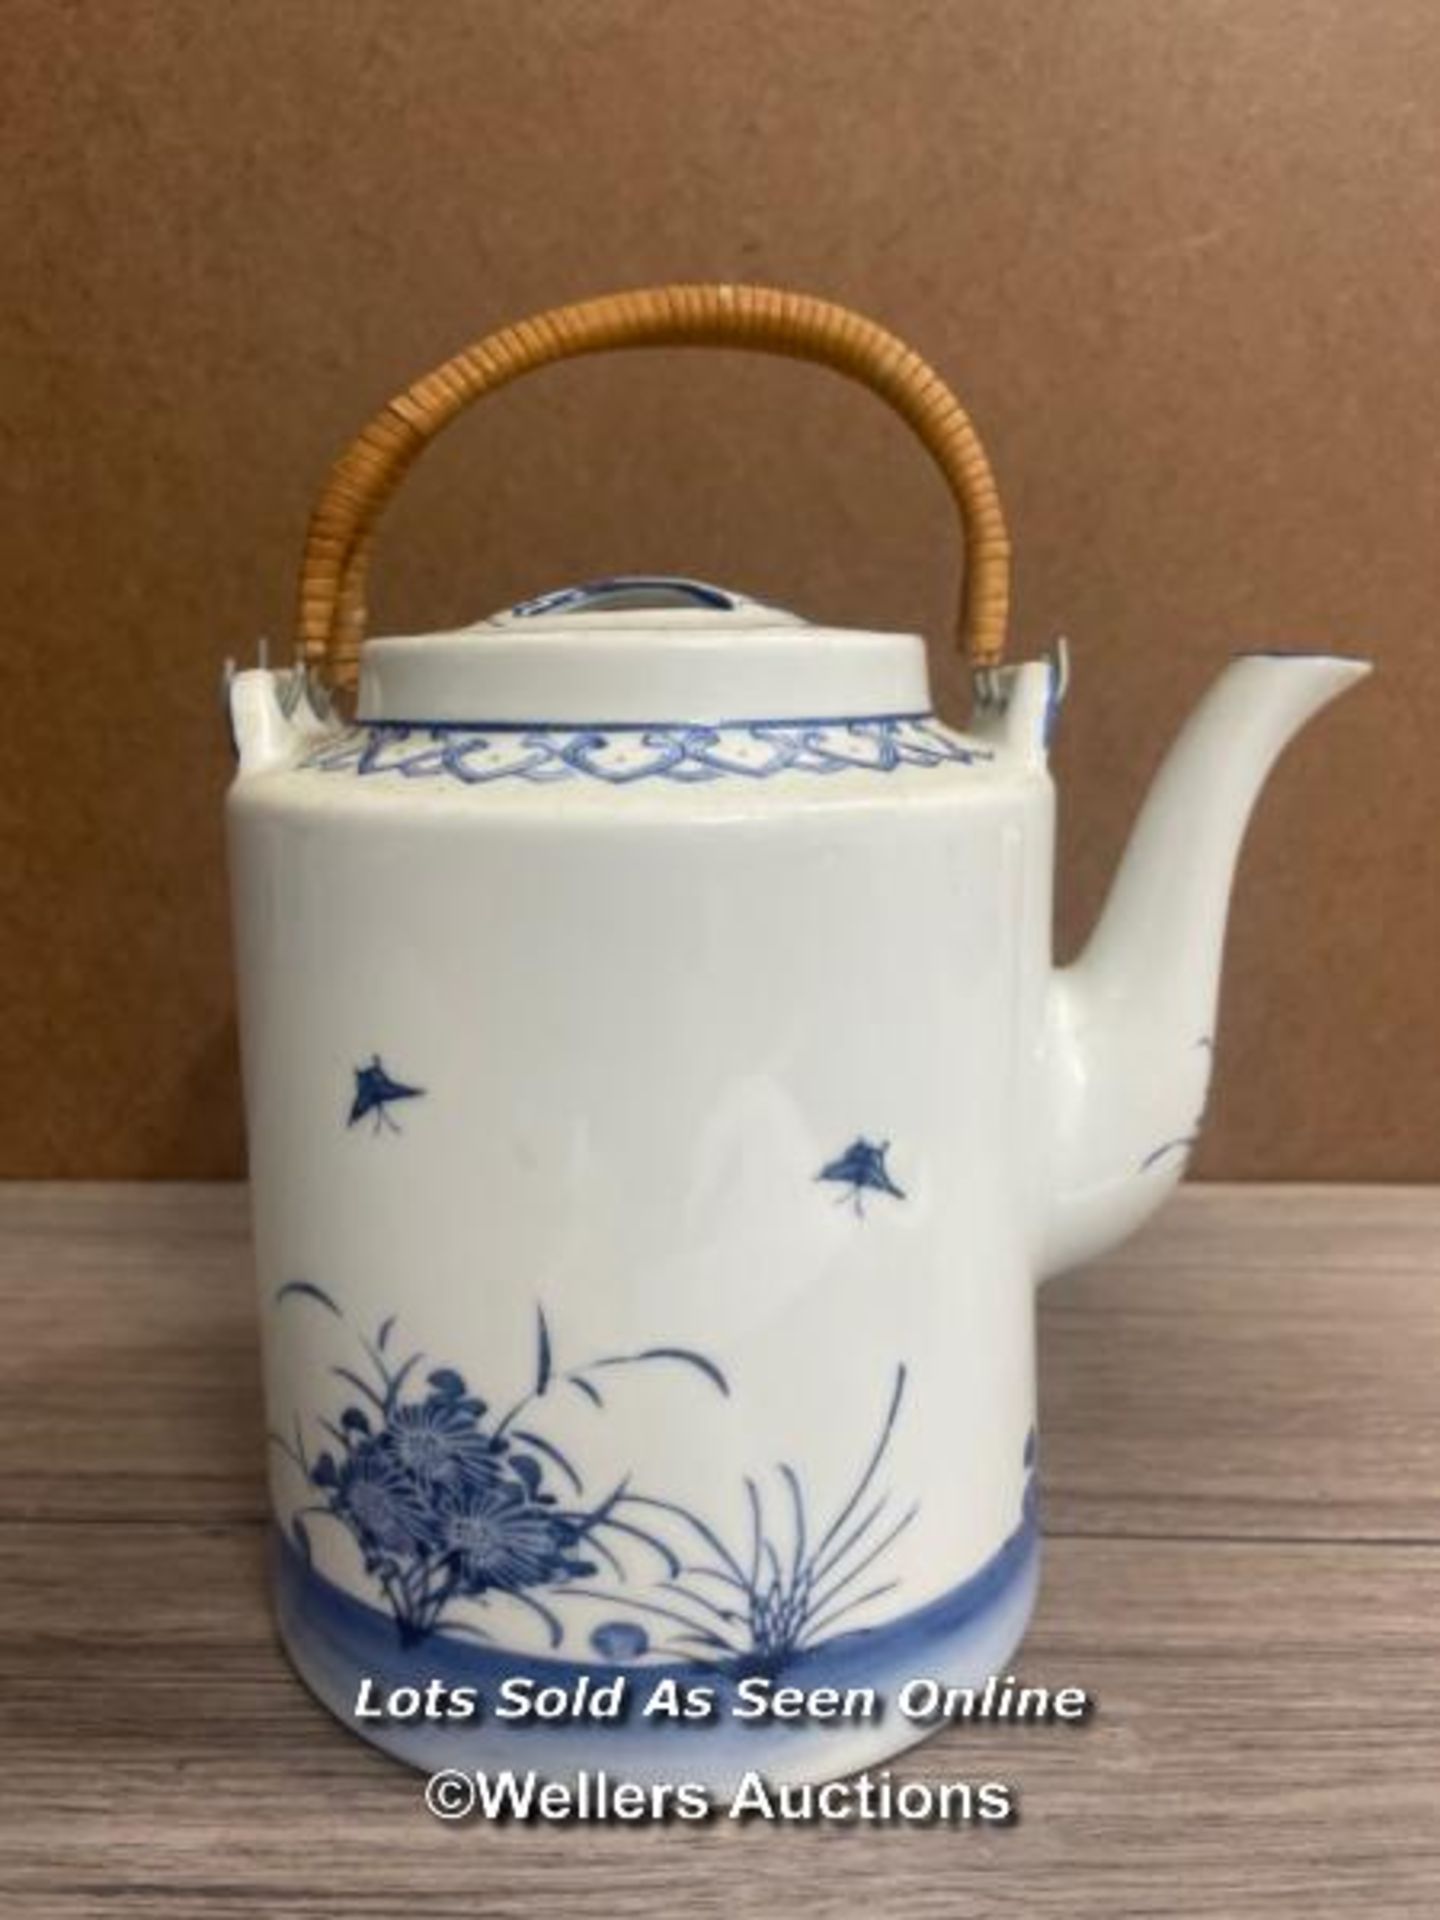 BLUE & WHITE ORIENTAL TEA POT WITH WICKER HANDLE, 16CM HIGH - Image 2 of 4